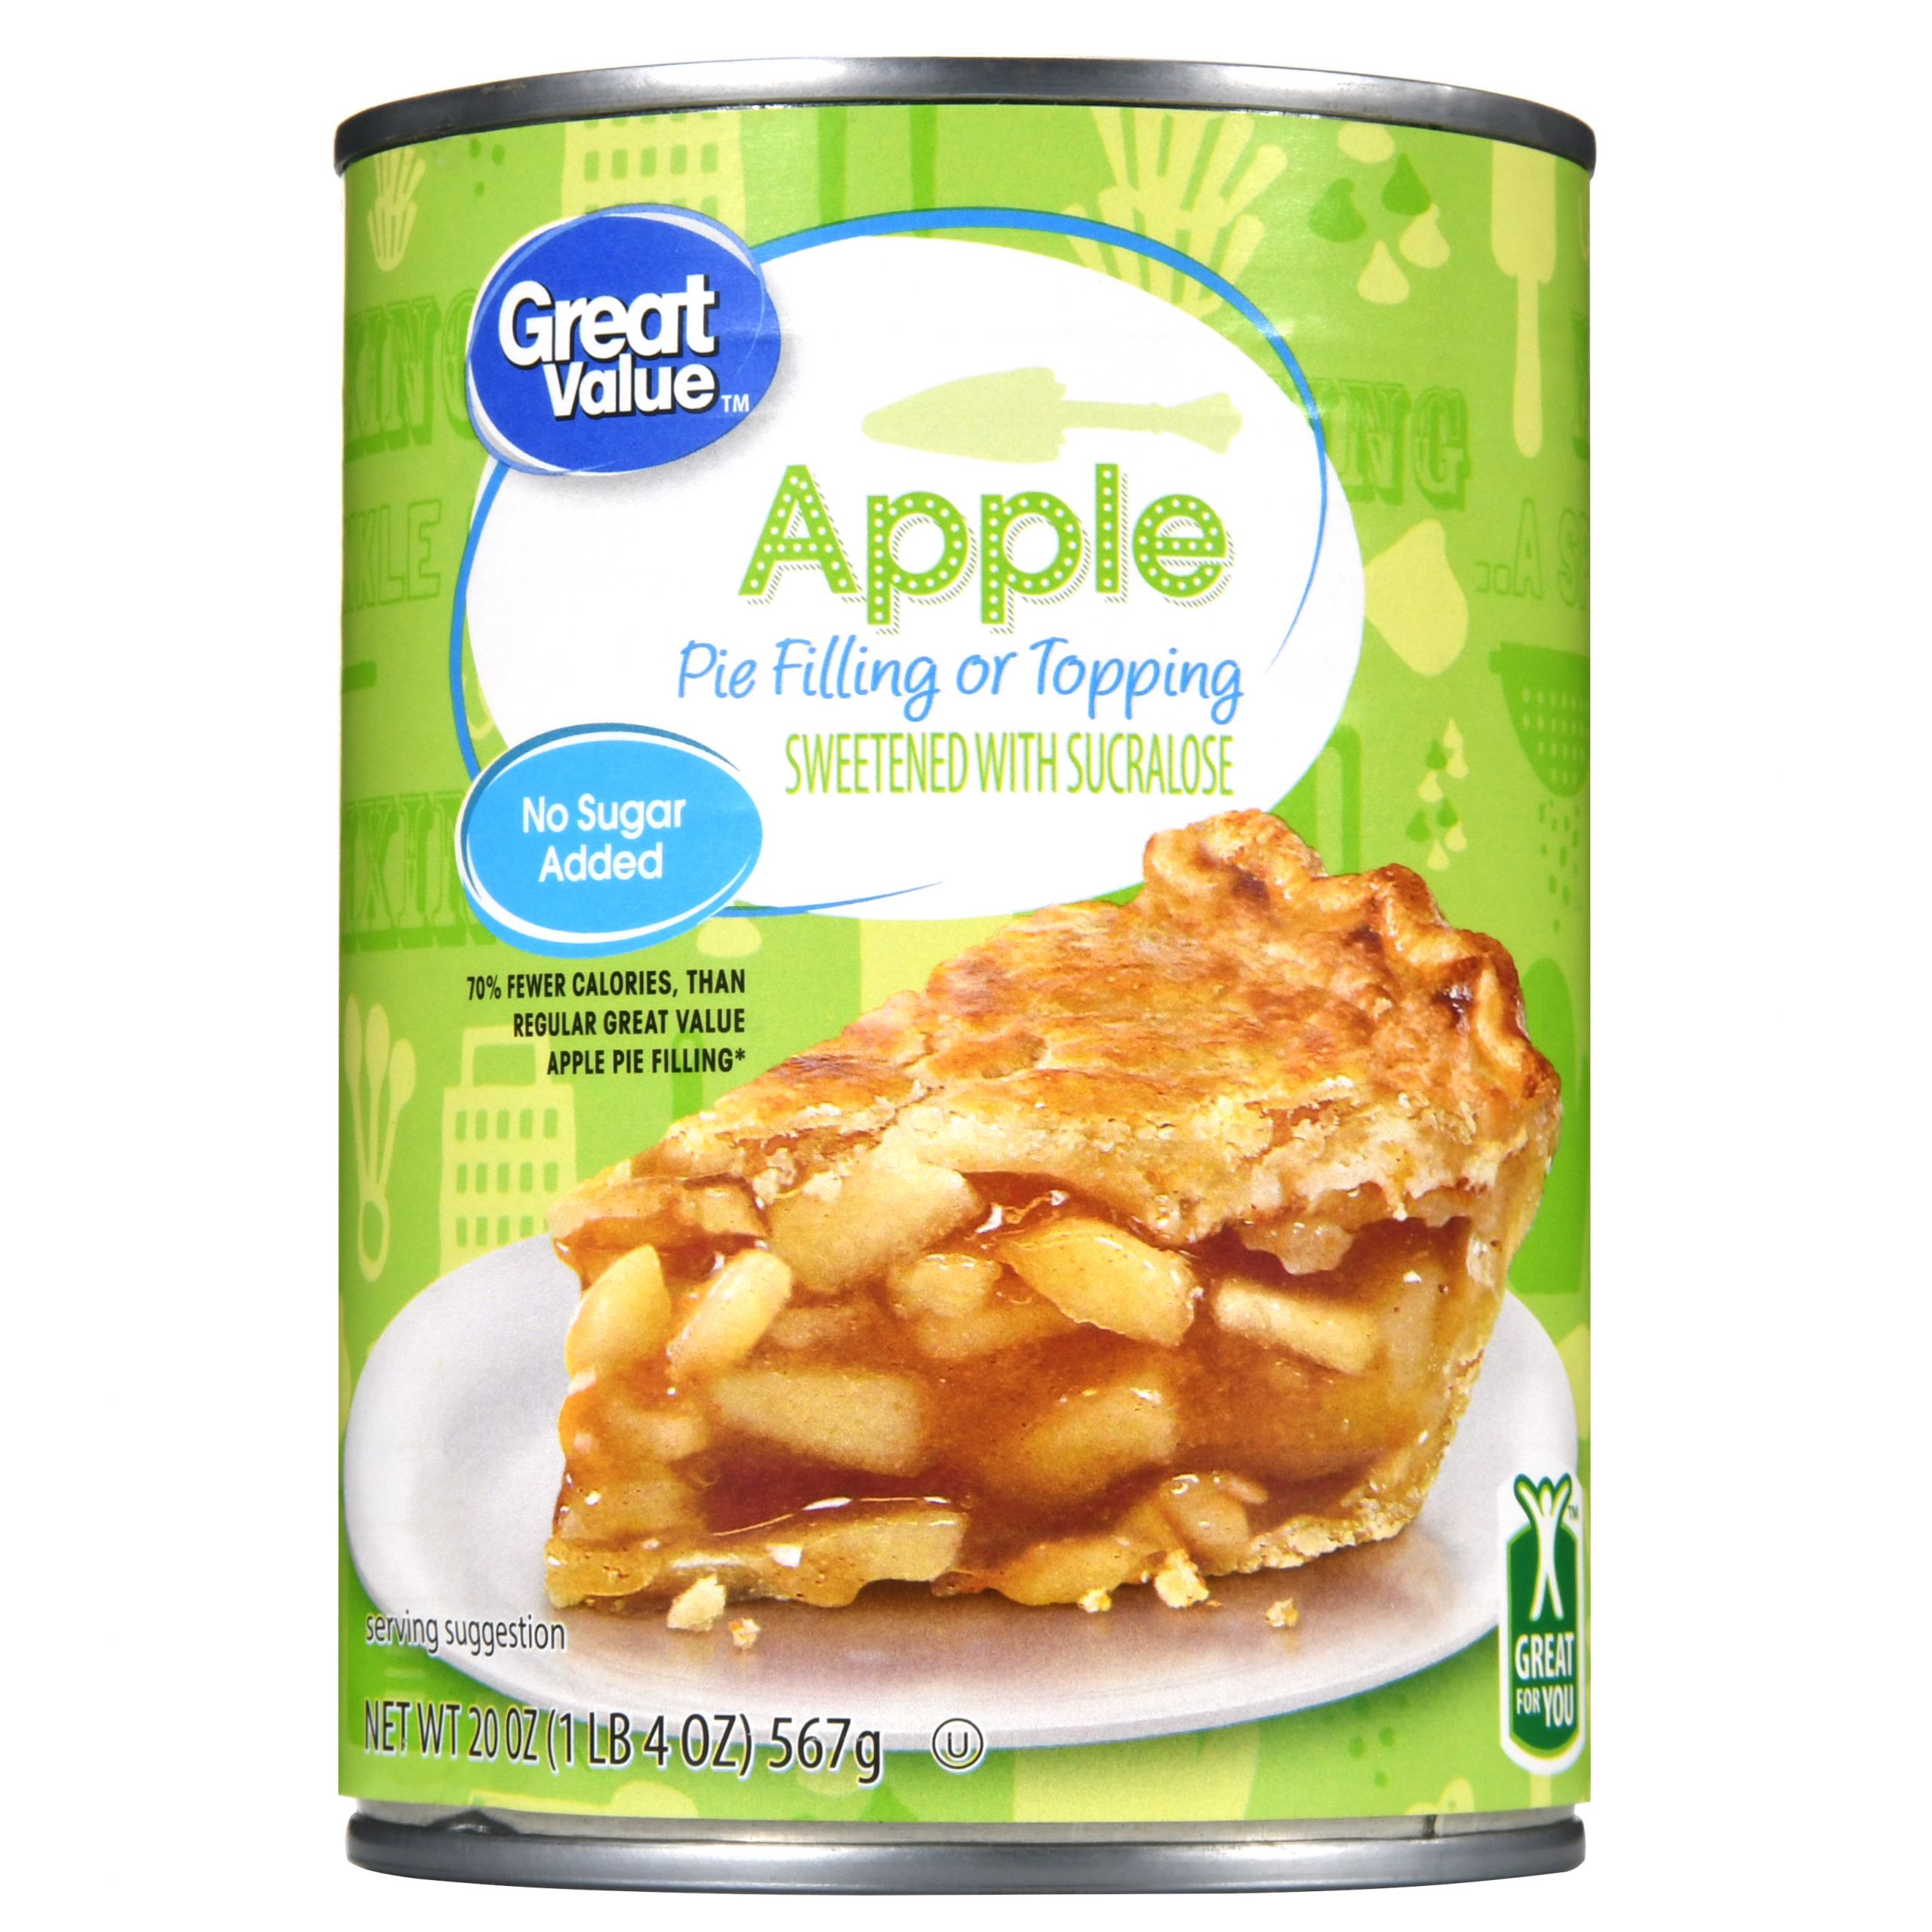 Walmart Apple Pie
 Great Value No Sugar Added Apple Pie Filling or Topping